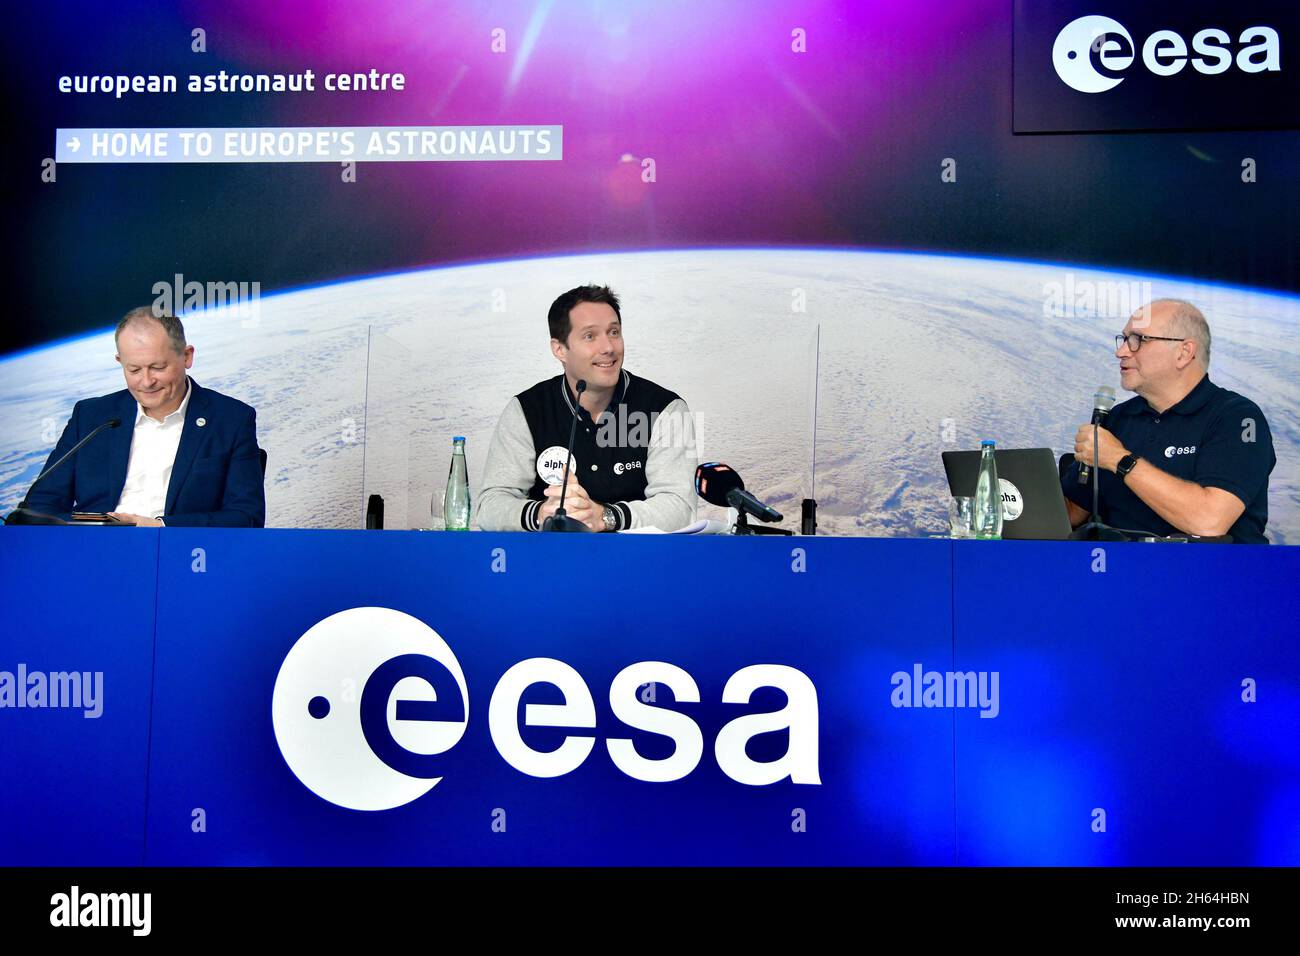 Cologne, Germany. 12th Nov, 2021. ESA News Conference with ESA Astronaut Thomas Pesquet, he holds the first press conference after his return from the International Space Station, after a 199 day mission on board. During this Mission âAlphaâ, Thomas became the Captain of the ship, as the first French Captain in history. Press conference at European Astronaut Centre (EAC), Cologne, Germany on November 12, 2021. Photo by Jana Call me J/ABACAPRESS.COM Credit: Abaca Press/Alamy Live News Stock Photo